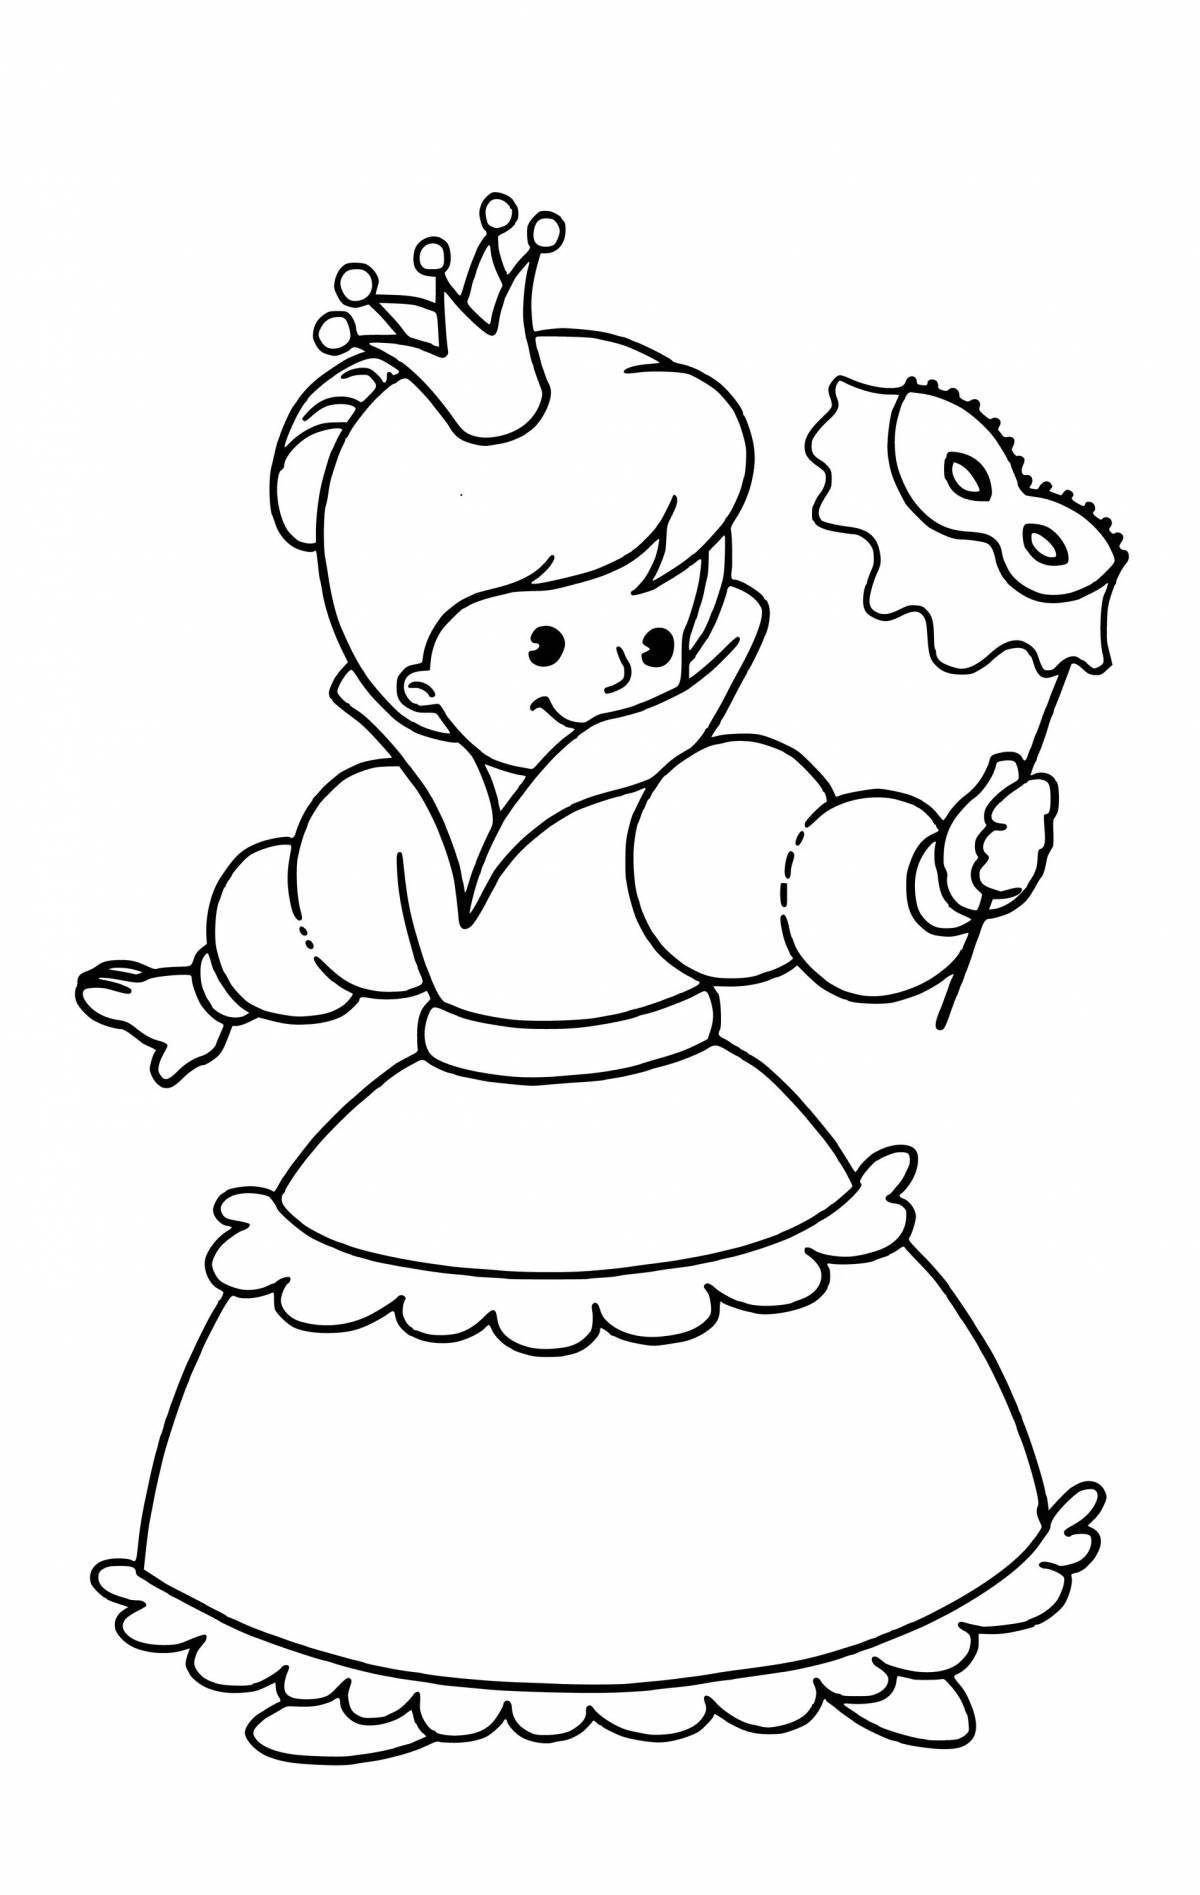 Coloring page nice carnival costume